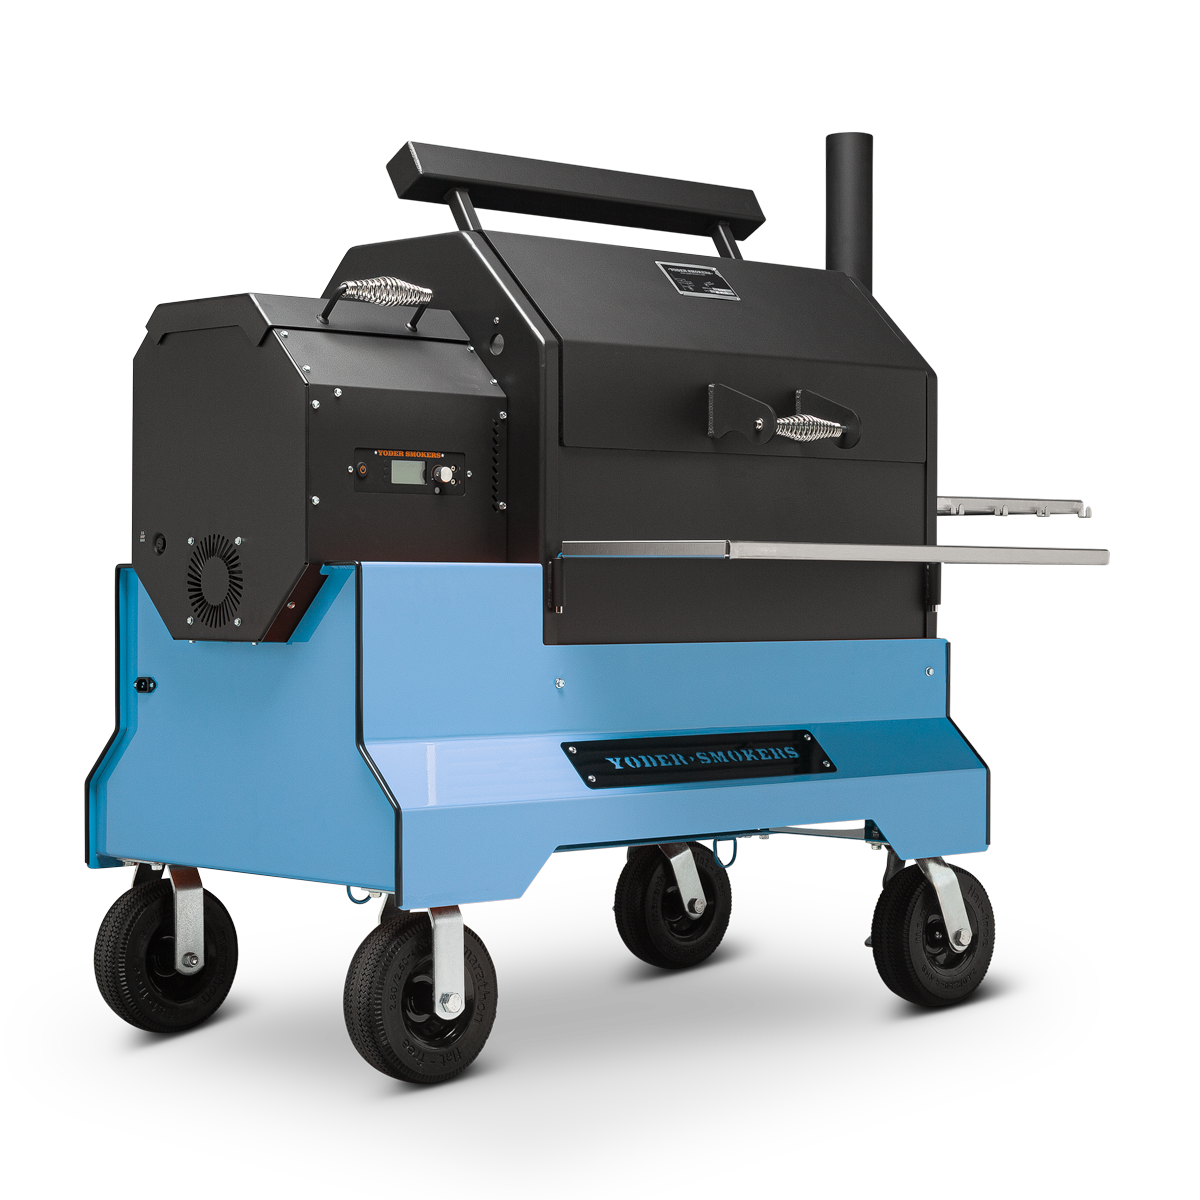 Yoder Smokers YS640s Pellet Grill Limited Edition Colors Outdoor Grills Cerulean Blue 12034648